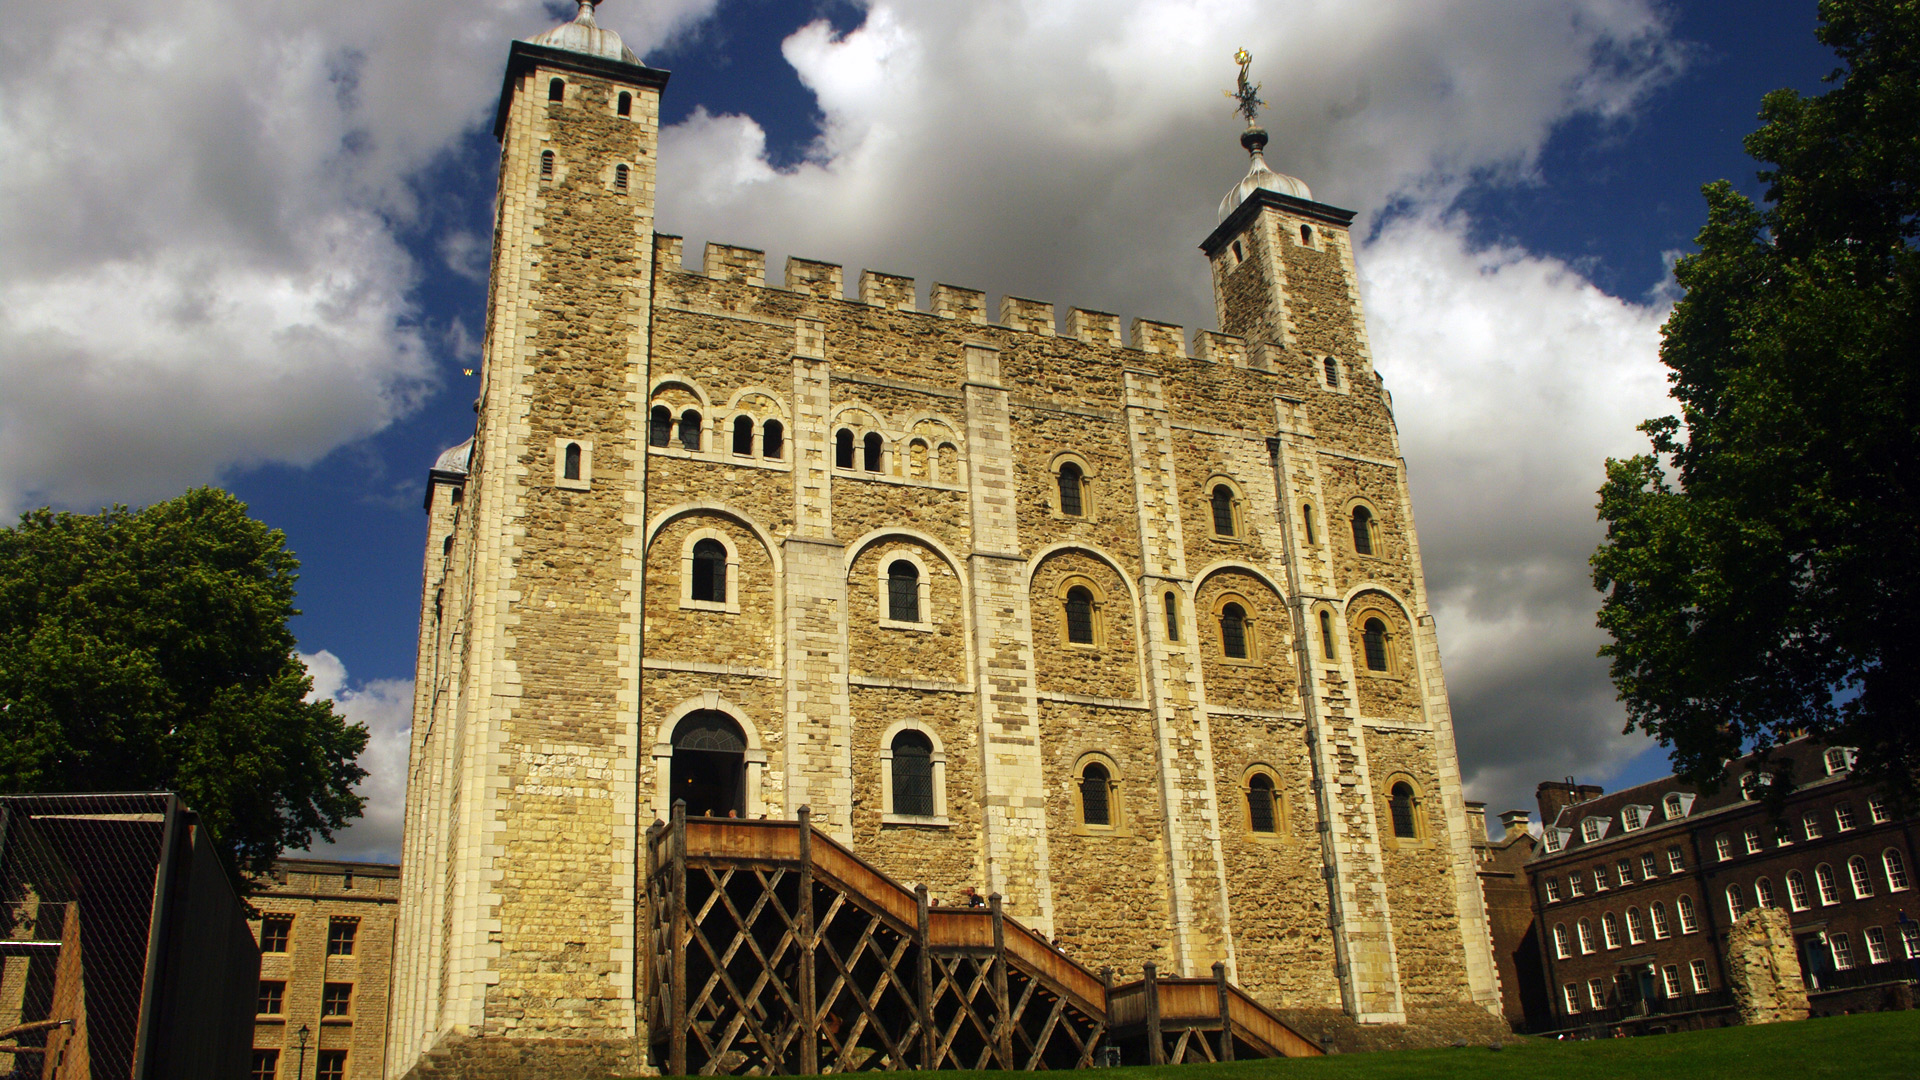 The White Tower,1080 - Tower of London